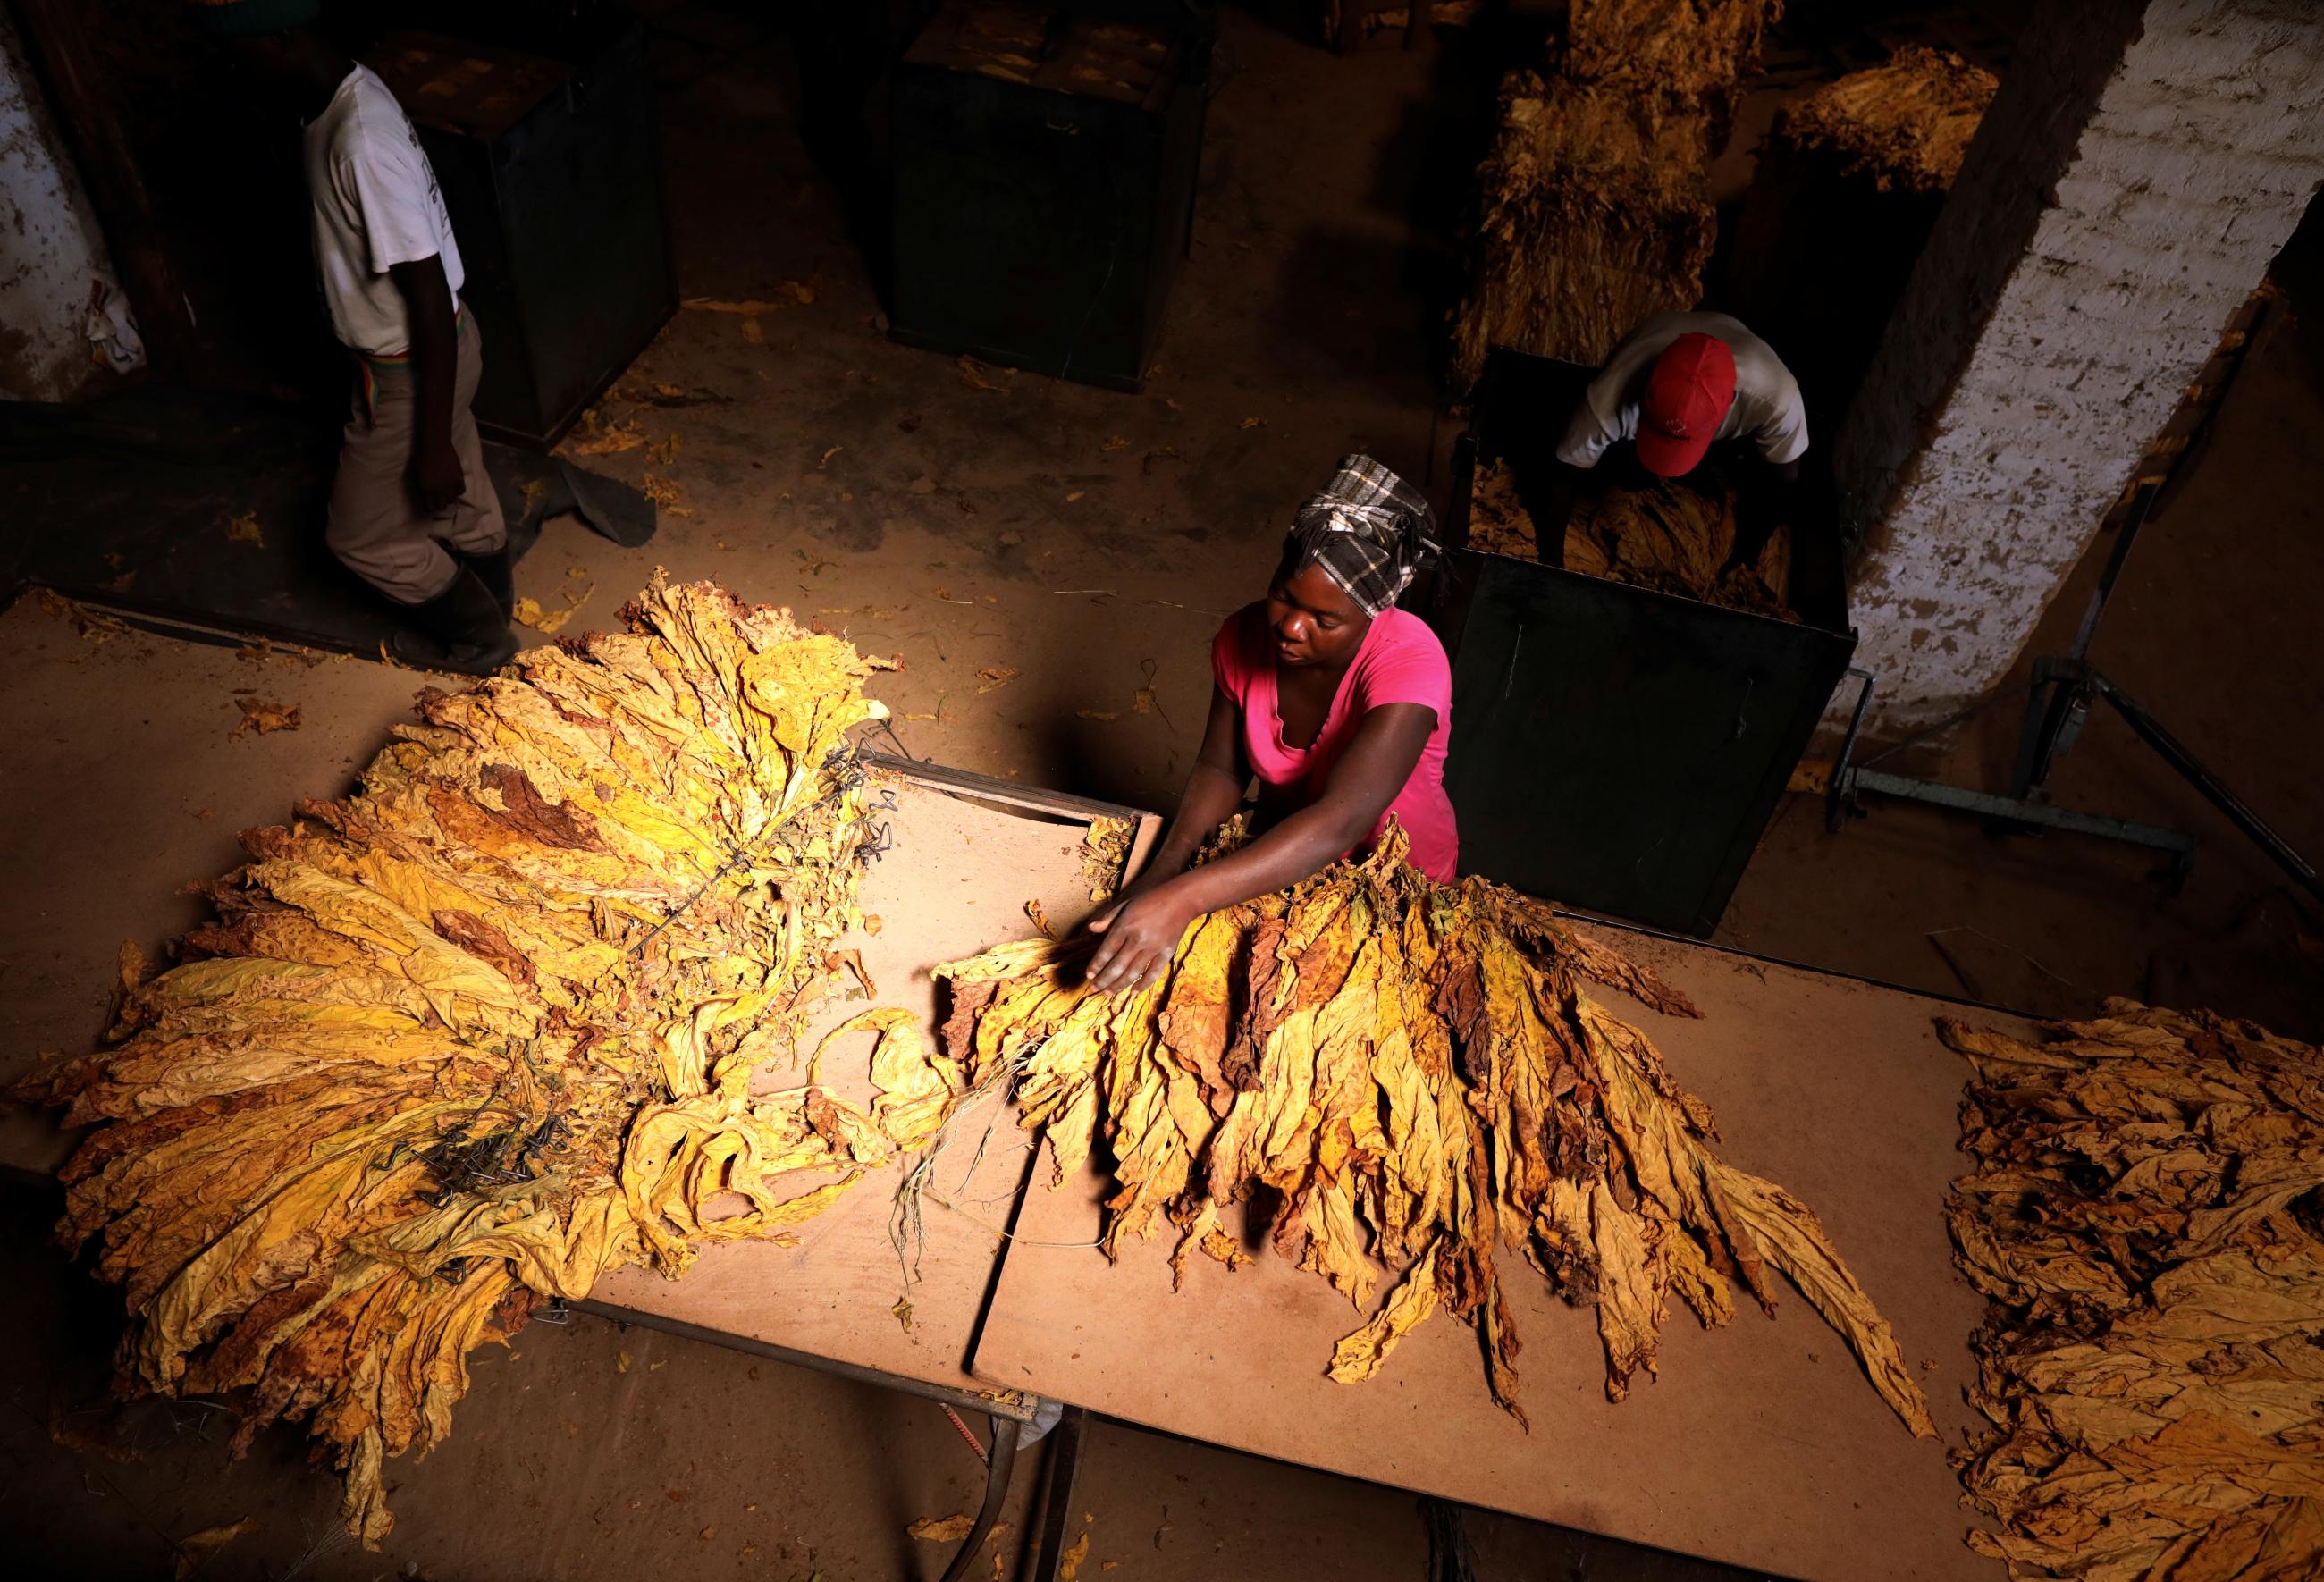 A woman sorts a bale of tobacco at a processing plant outside Harare, Zimbabwe on February 20, 2019.